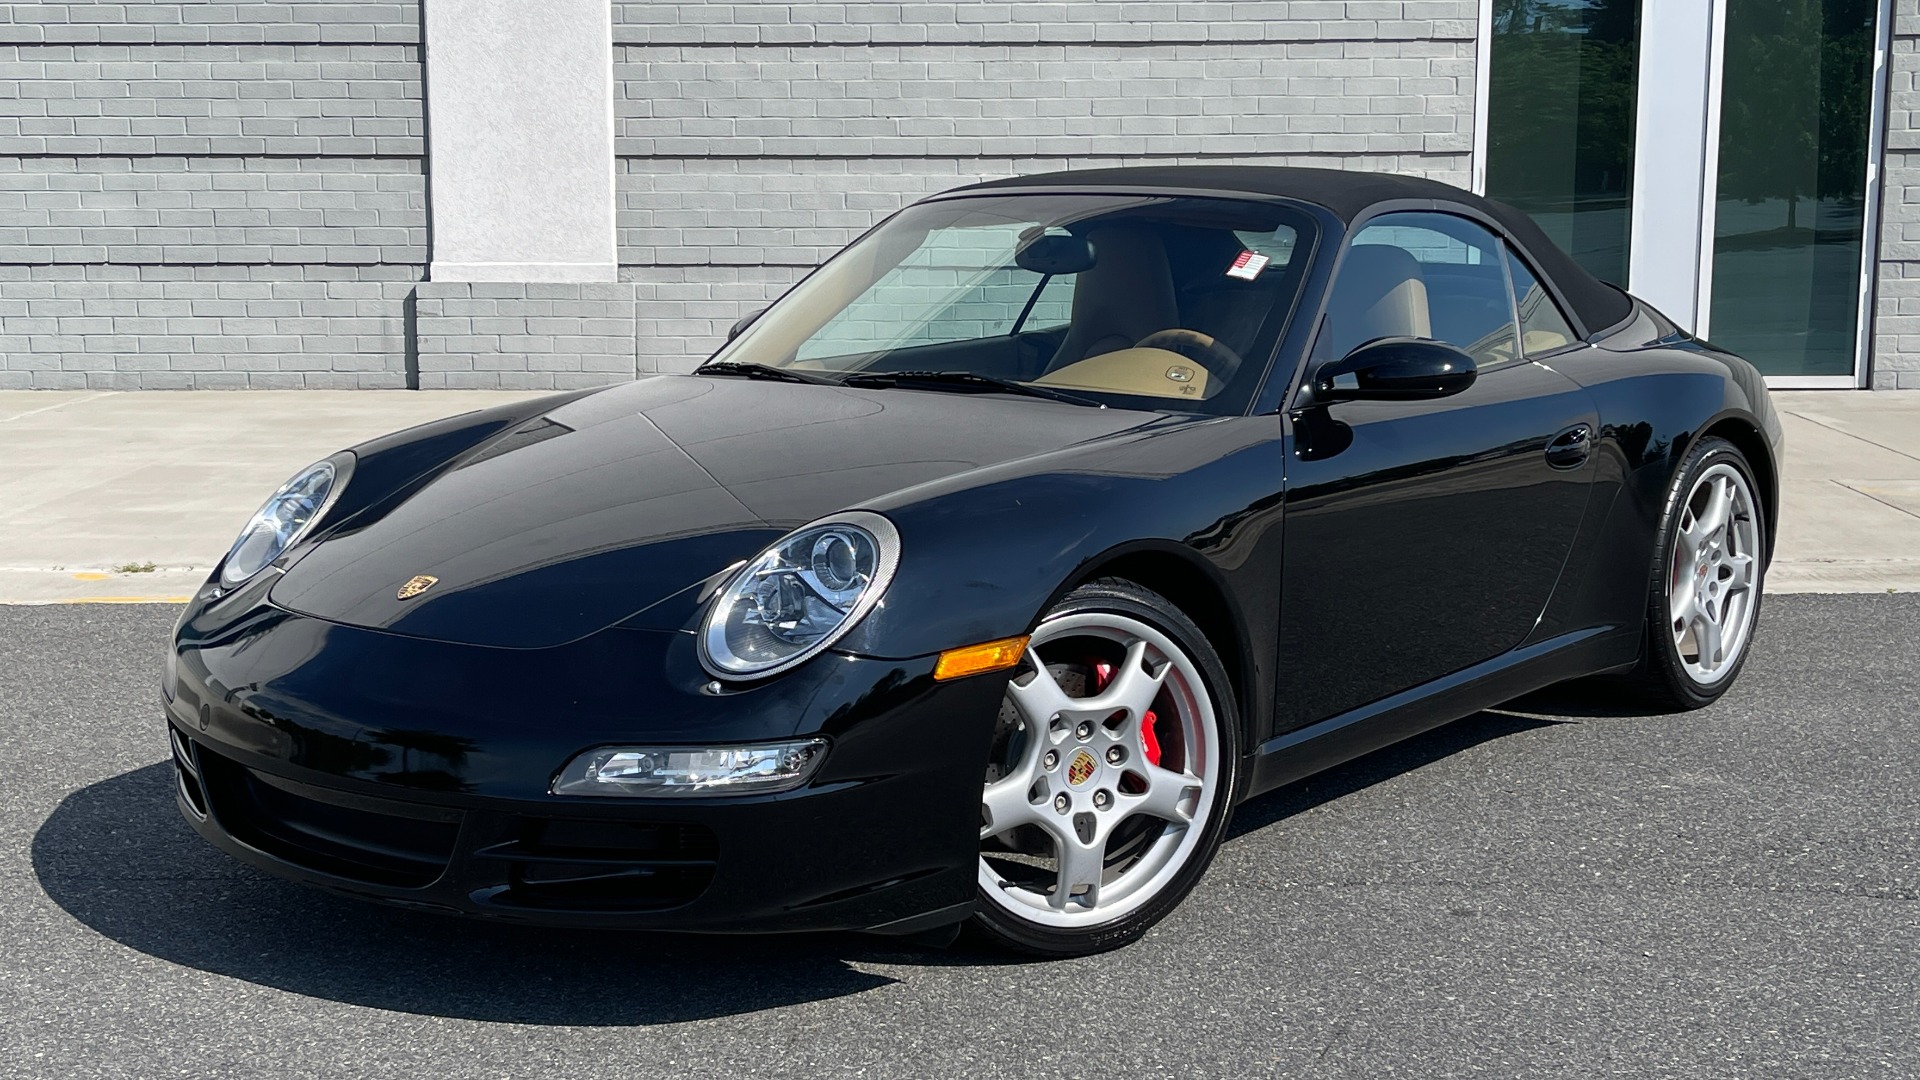 Used 2006 Porsche 911 CARRERA S CABRIOLET / BOSE / CD CHANGER / PWR SEAT PKG / HTD STS for sale $56,400 at Formula Imports in Charlotte NC 28227 20